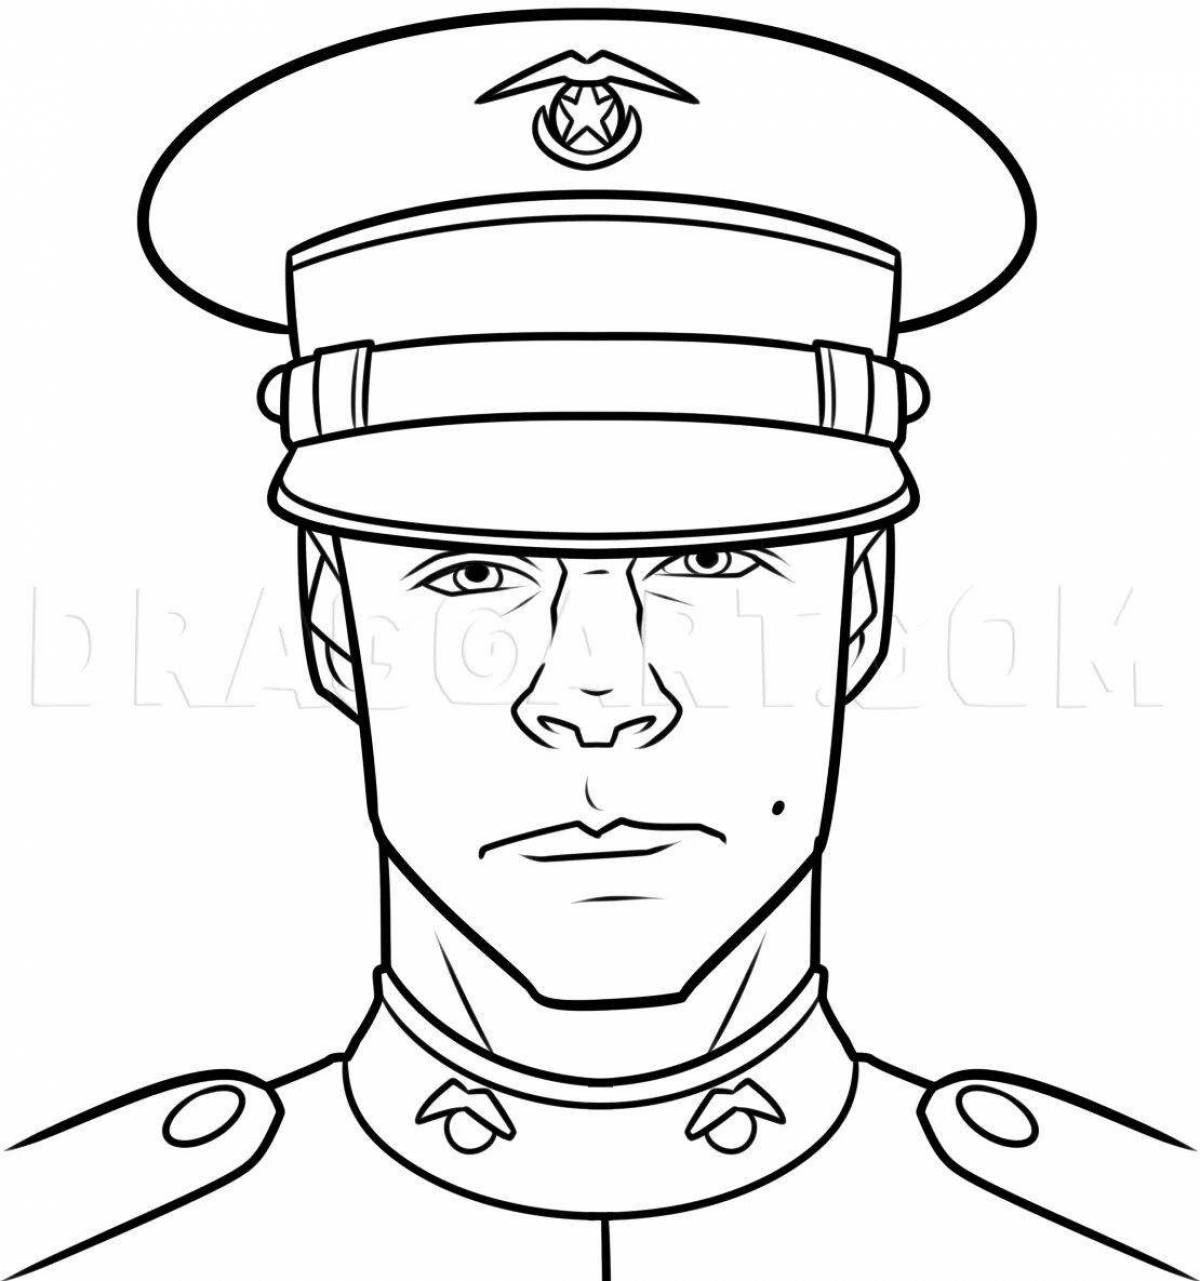 Combat officer coloring page